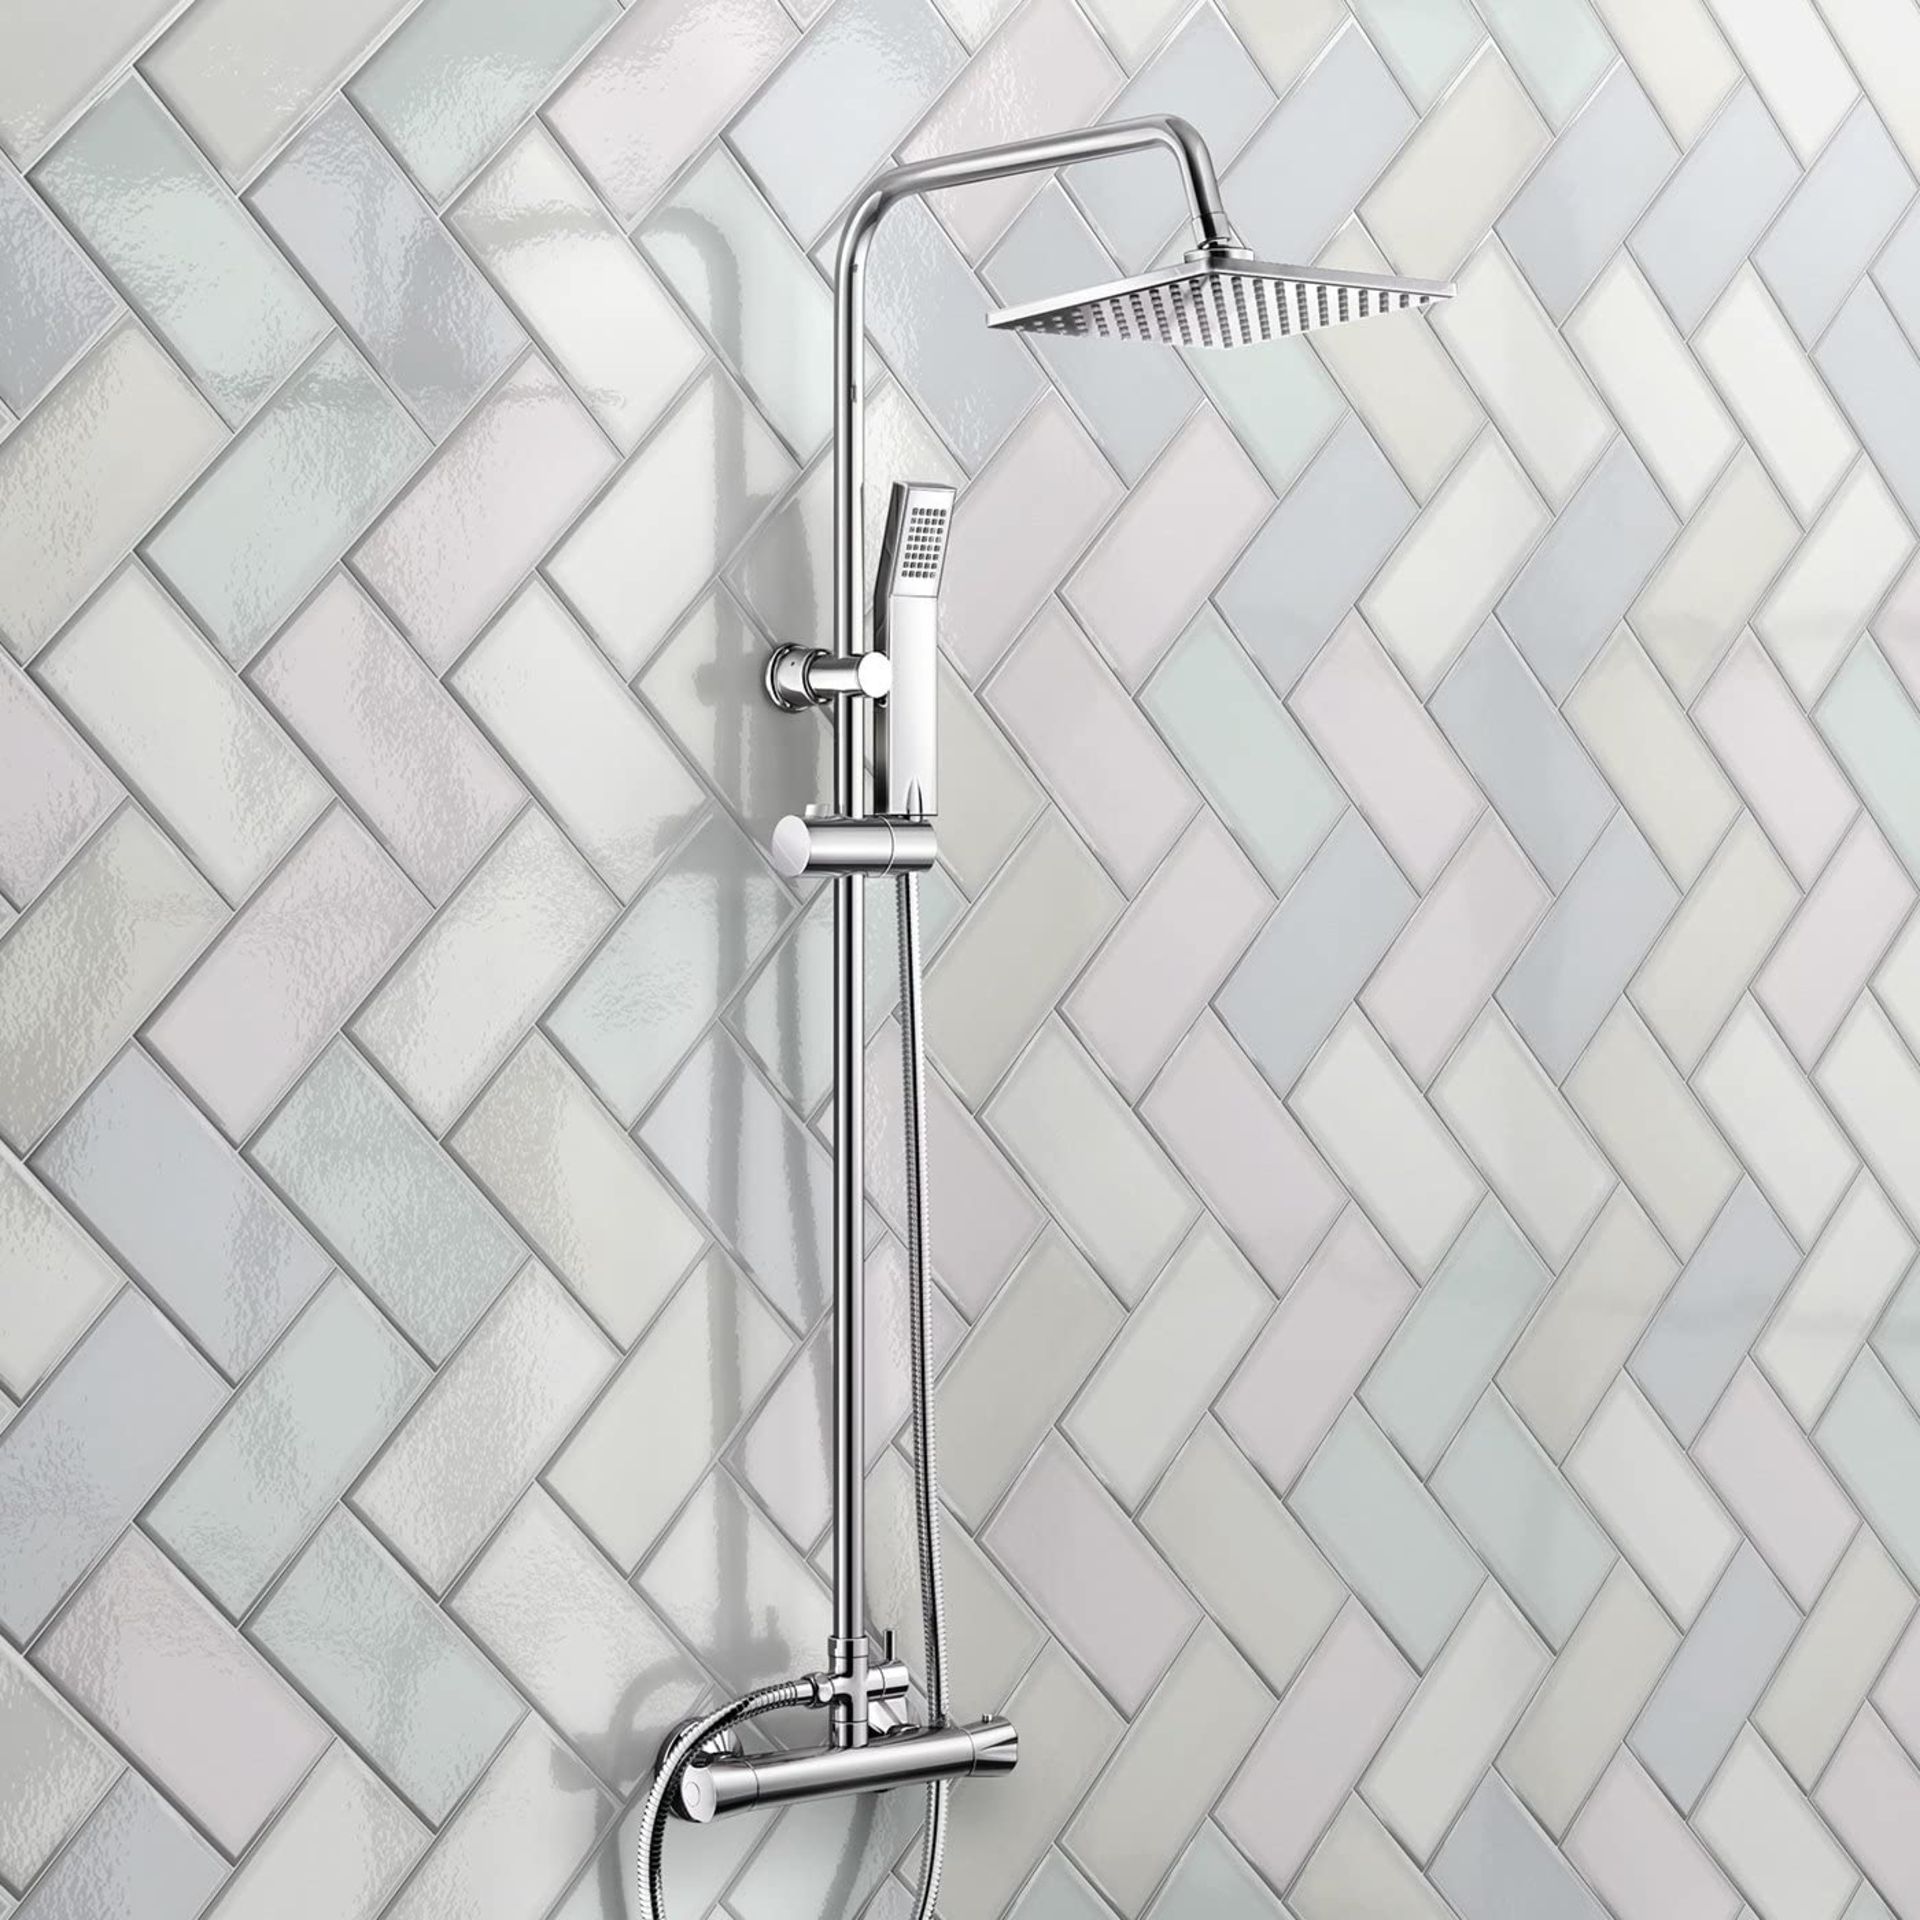 New & Boxed Exposed Thermostatic 2-Way Bar Mixer Shower Set. Chrome Valve, 200mm Square Head + ... - Image 3 of 3